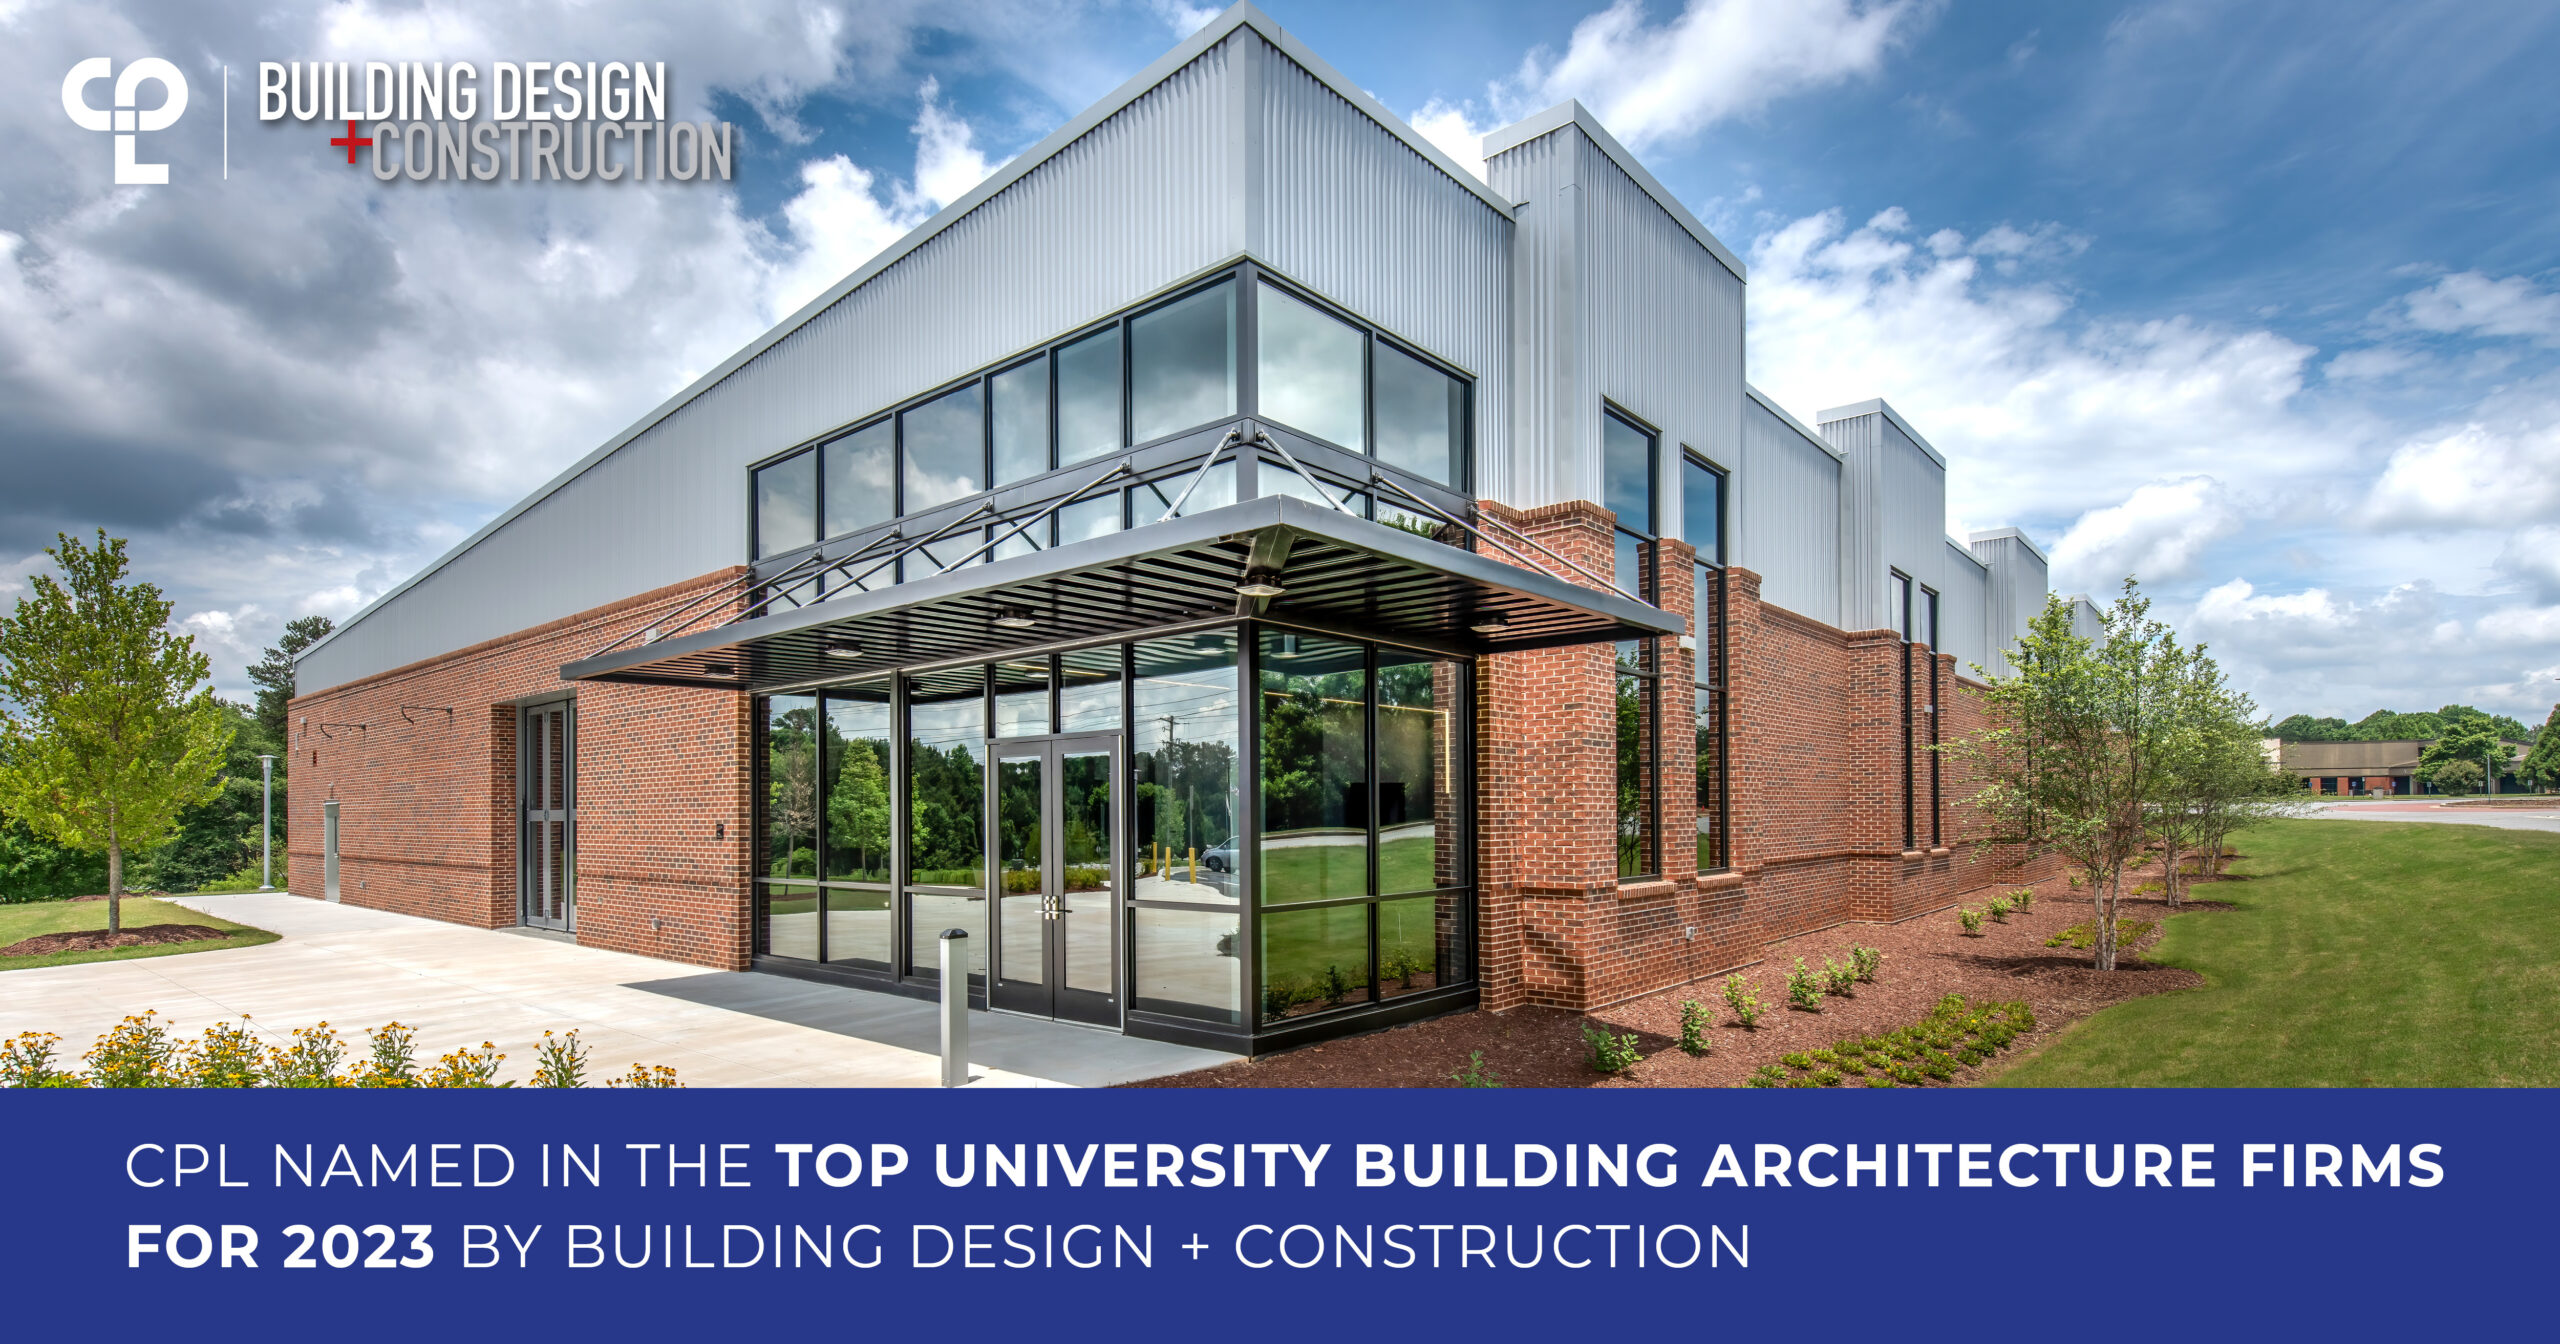 A graphic with an exterior image of a modern style building made of brick, steel, and glass. This is Chattahoochee Technical College's Center for Advanced Manufacturing and Emerging Technologies. In the top left is the CPL logo and Building Design + Construction's logo. At the bottom of the graphic is a white box with text that reads "CPL IS NAMED IN THE TOP UNIVERSITY BUILDING ARCHITECTURE FIRMS FOR 2023 BY BUILDING DESIGN + CONSTRUCTION"